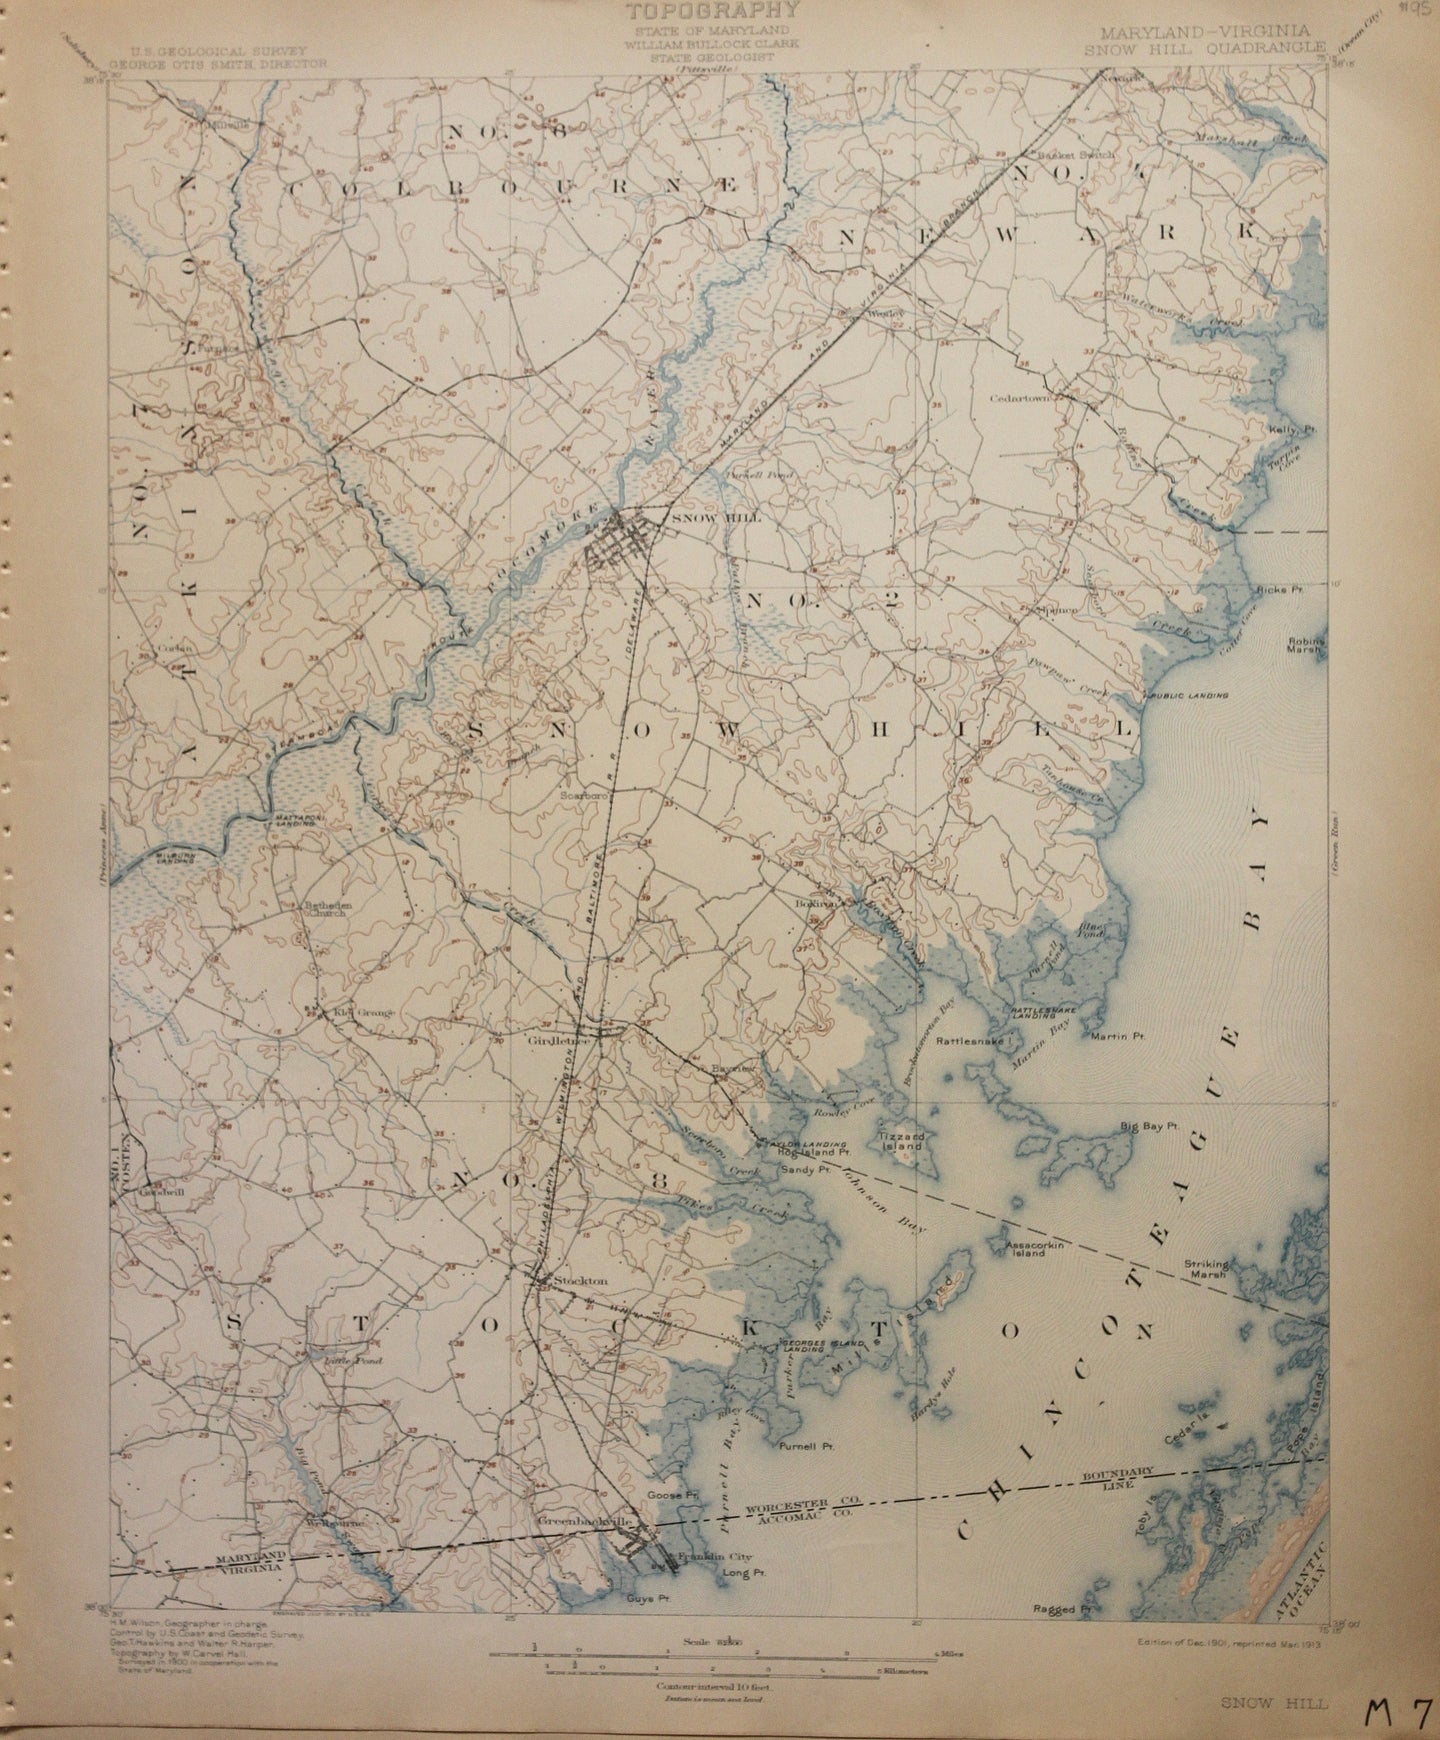 Genuine-Antique-Map-Snow-Hill-Maryland-Virginia--1913-U-S-Geological-Survey--Maps-Of-Antiquity